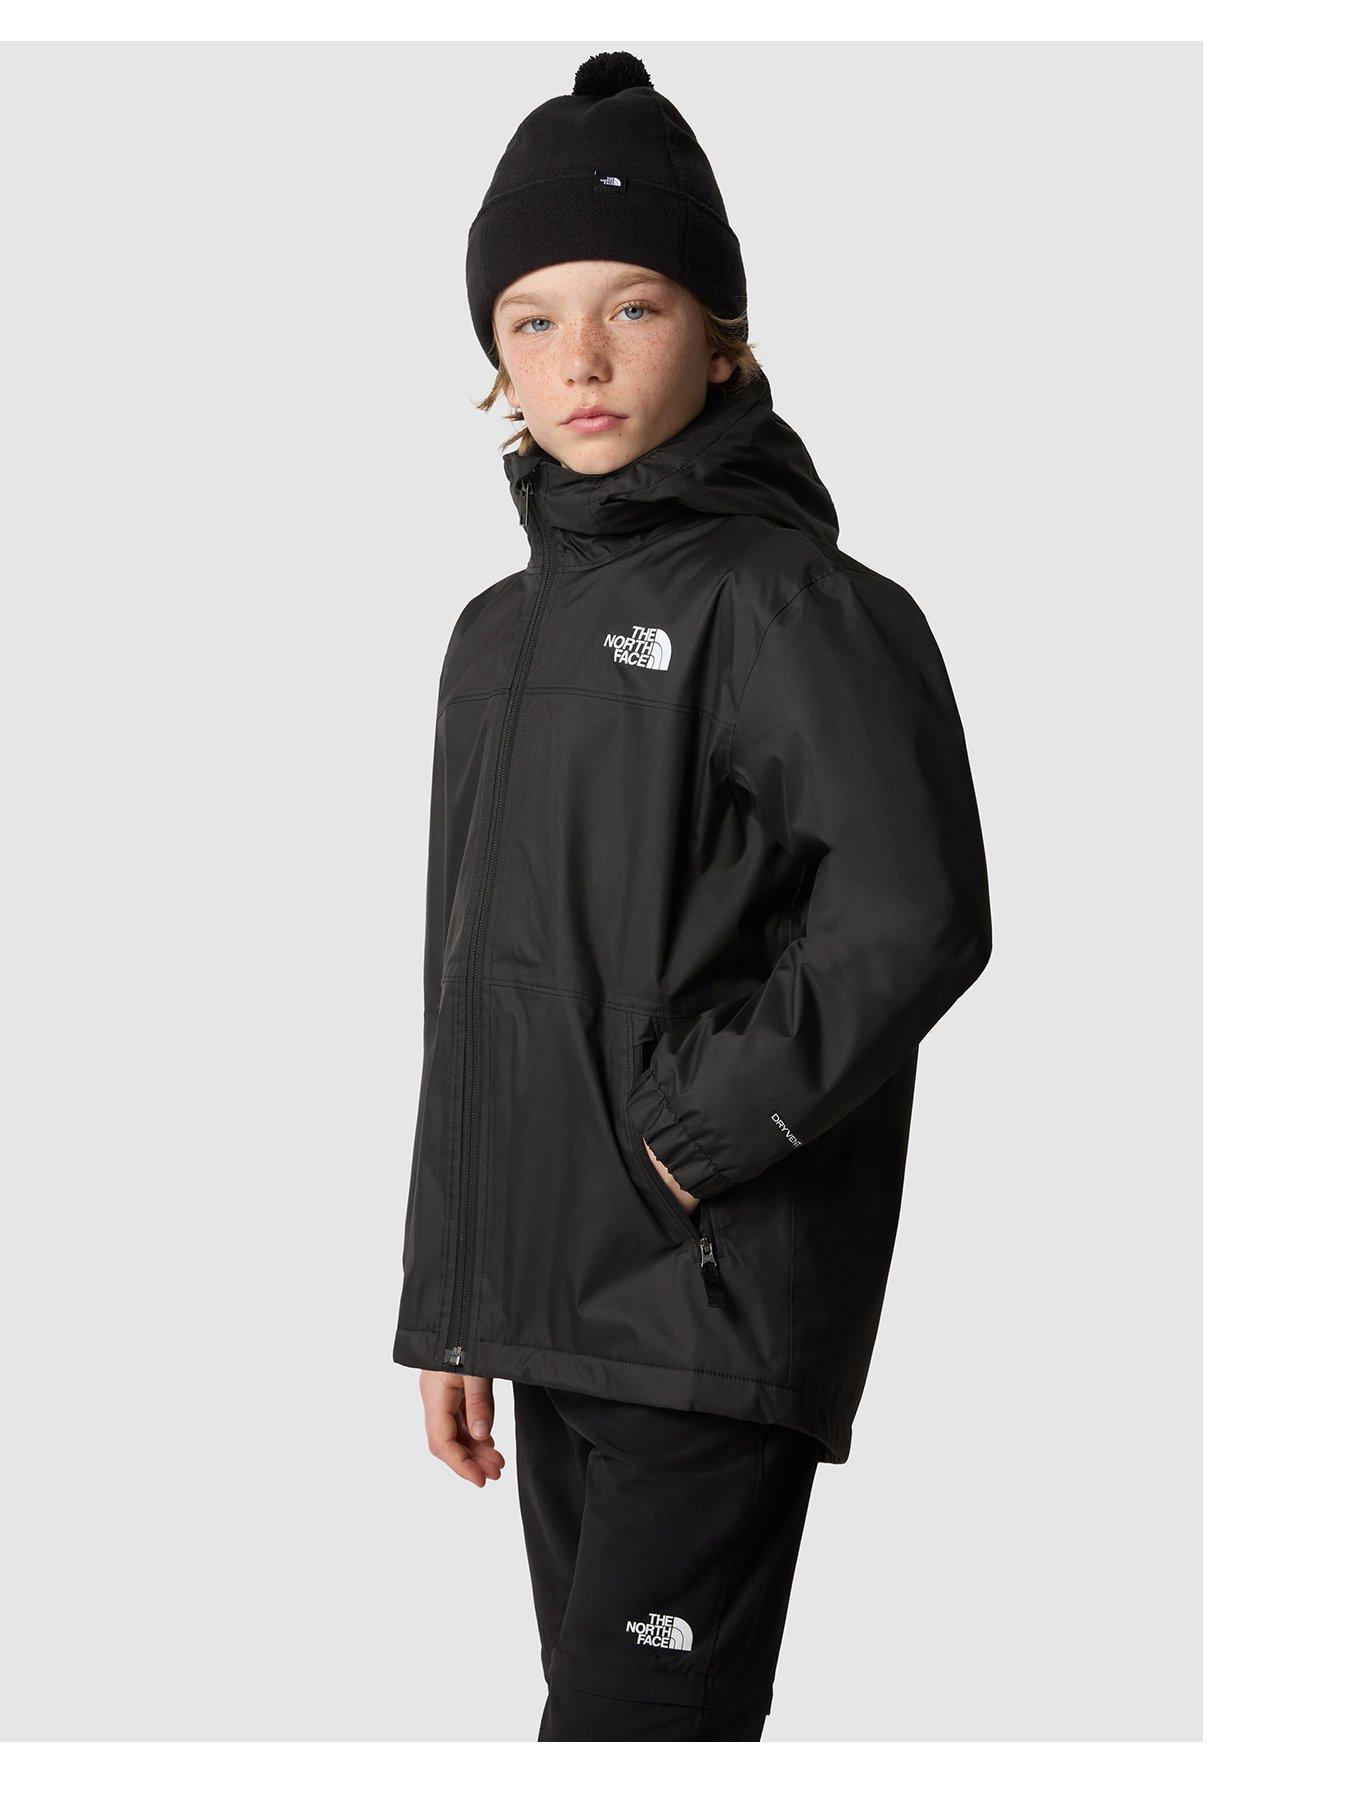 The north face | Coats & jackets | Boys clothes | Child & baby 